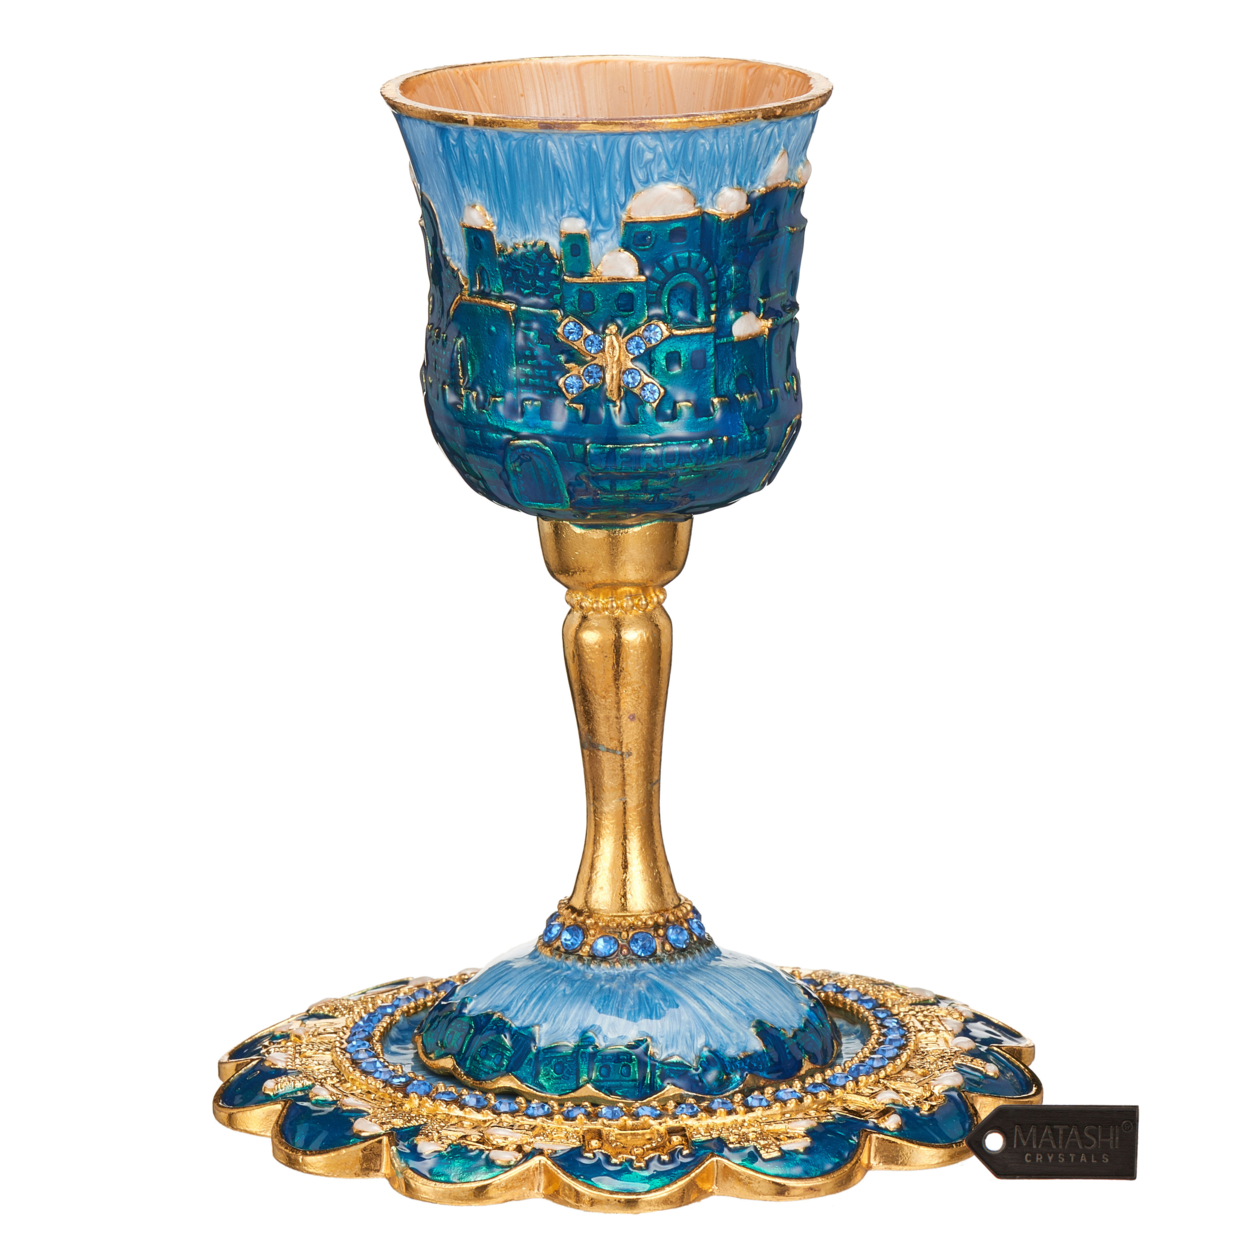 Matashi Hand-Painted Enamel Tall Kiddush Cup Set W Stem & Tray W Crystals & Jerusalem Cityscape Goblet Judaica Gift Blessings Cup